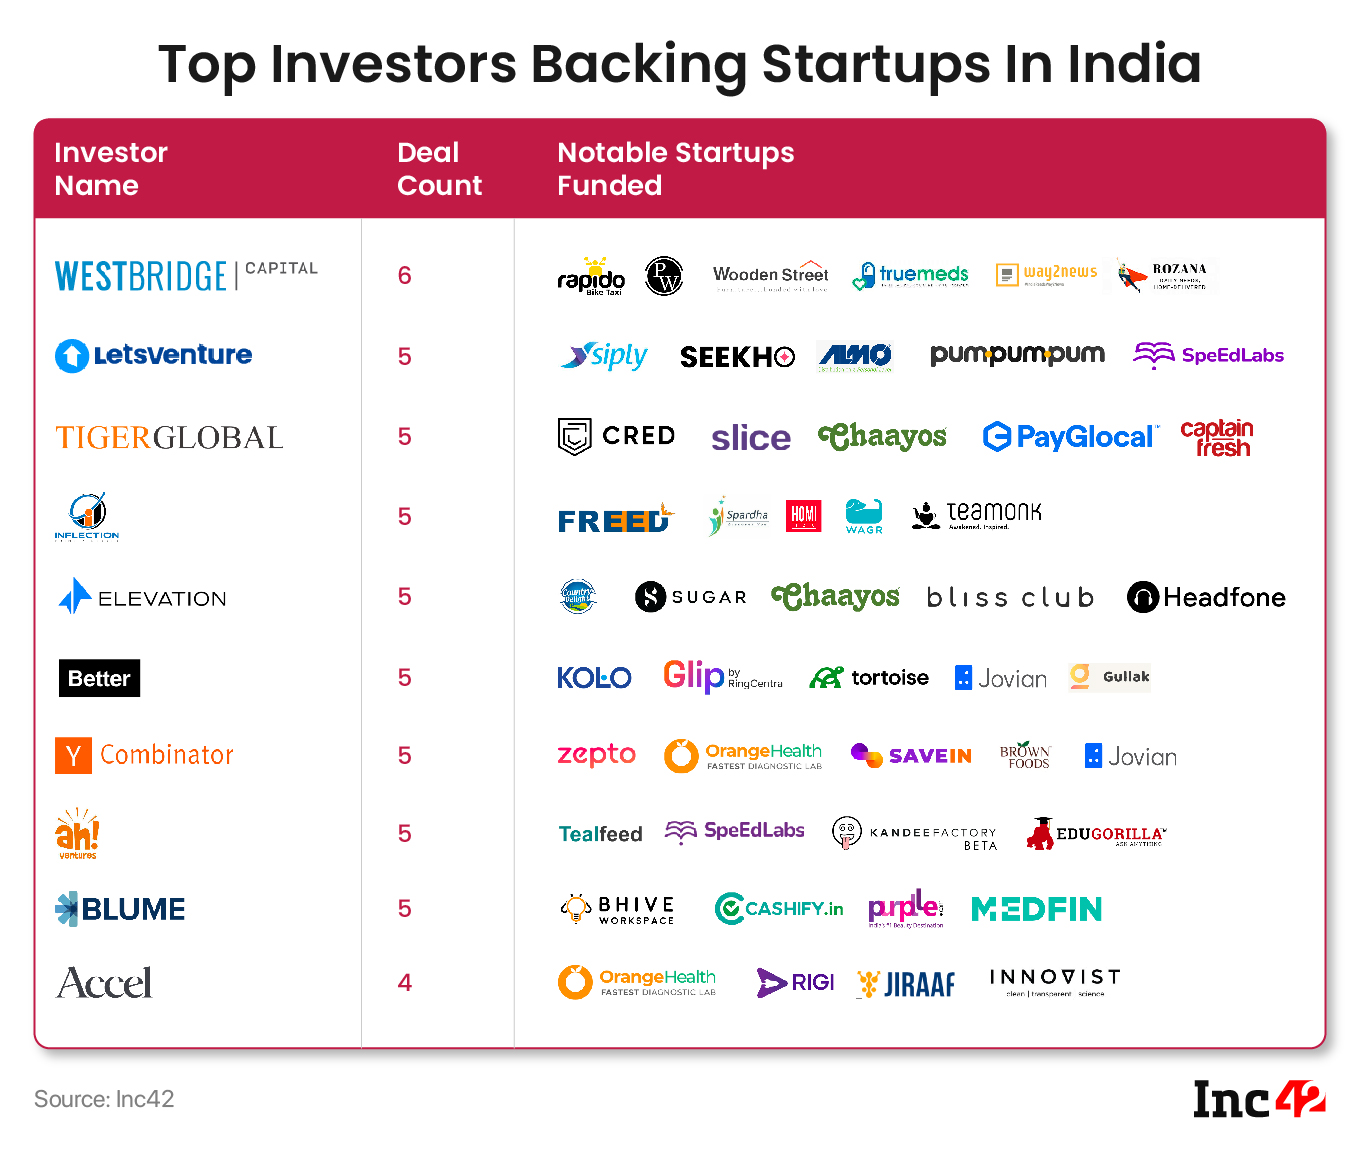 Meet The Top Investors Tapping The $1.6 Tn Indian Consumer Internet Opportunity